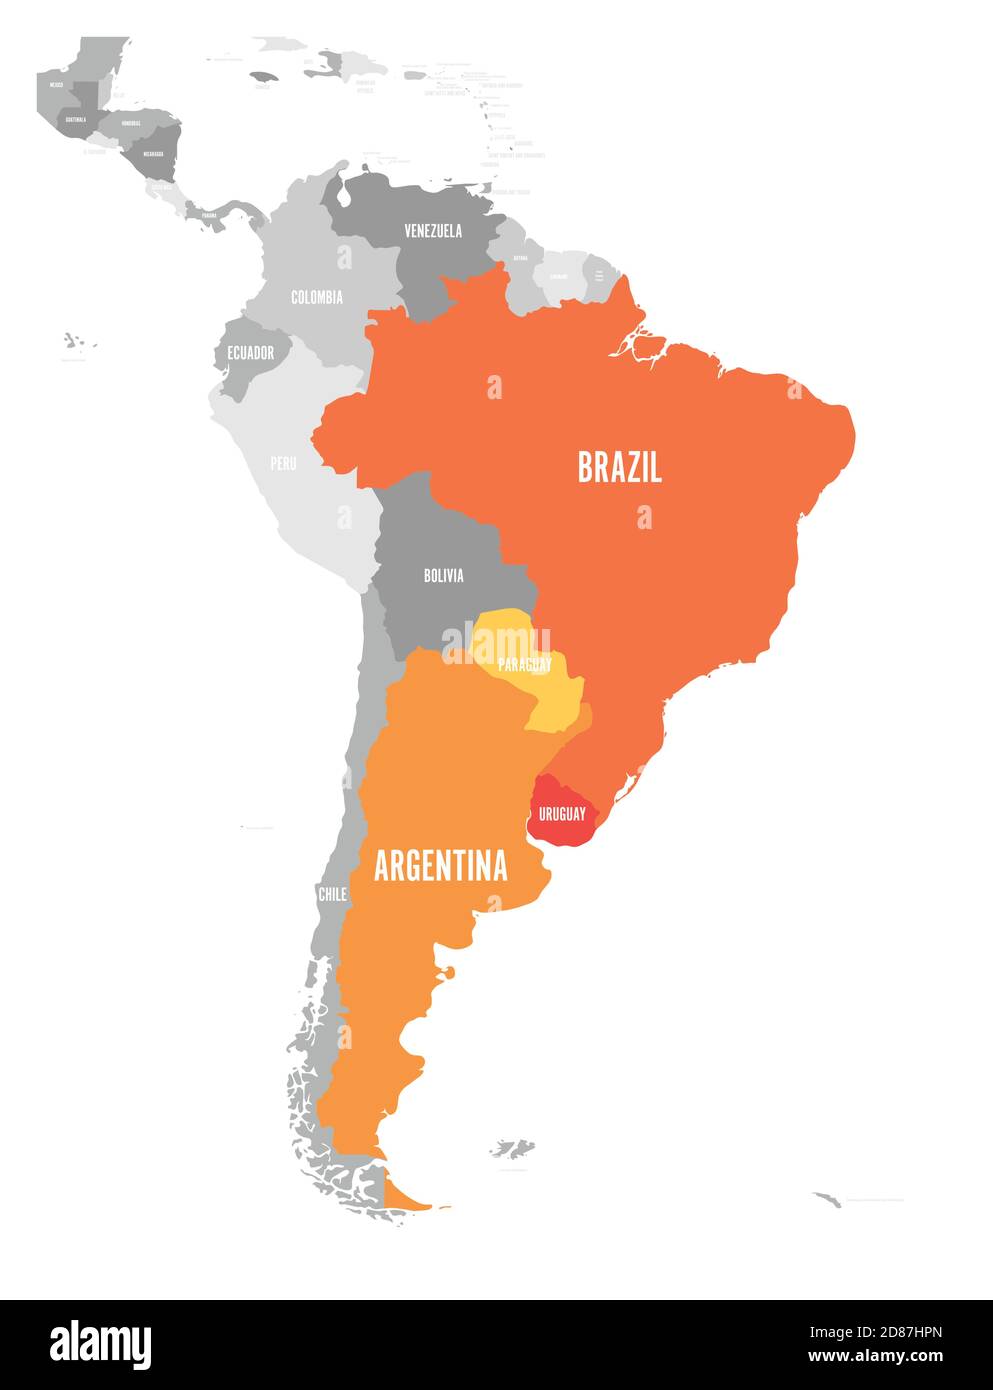 Map of MERCOSUR countires. South american trade association. Orange highlighted member states Brazil, Paraguay, Uruguay and Argetina. Since December 2016. Stock Vector